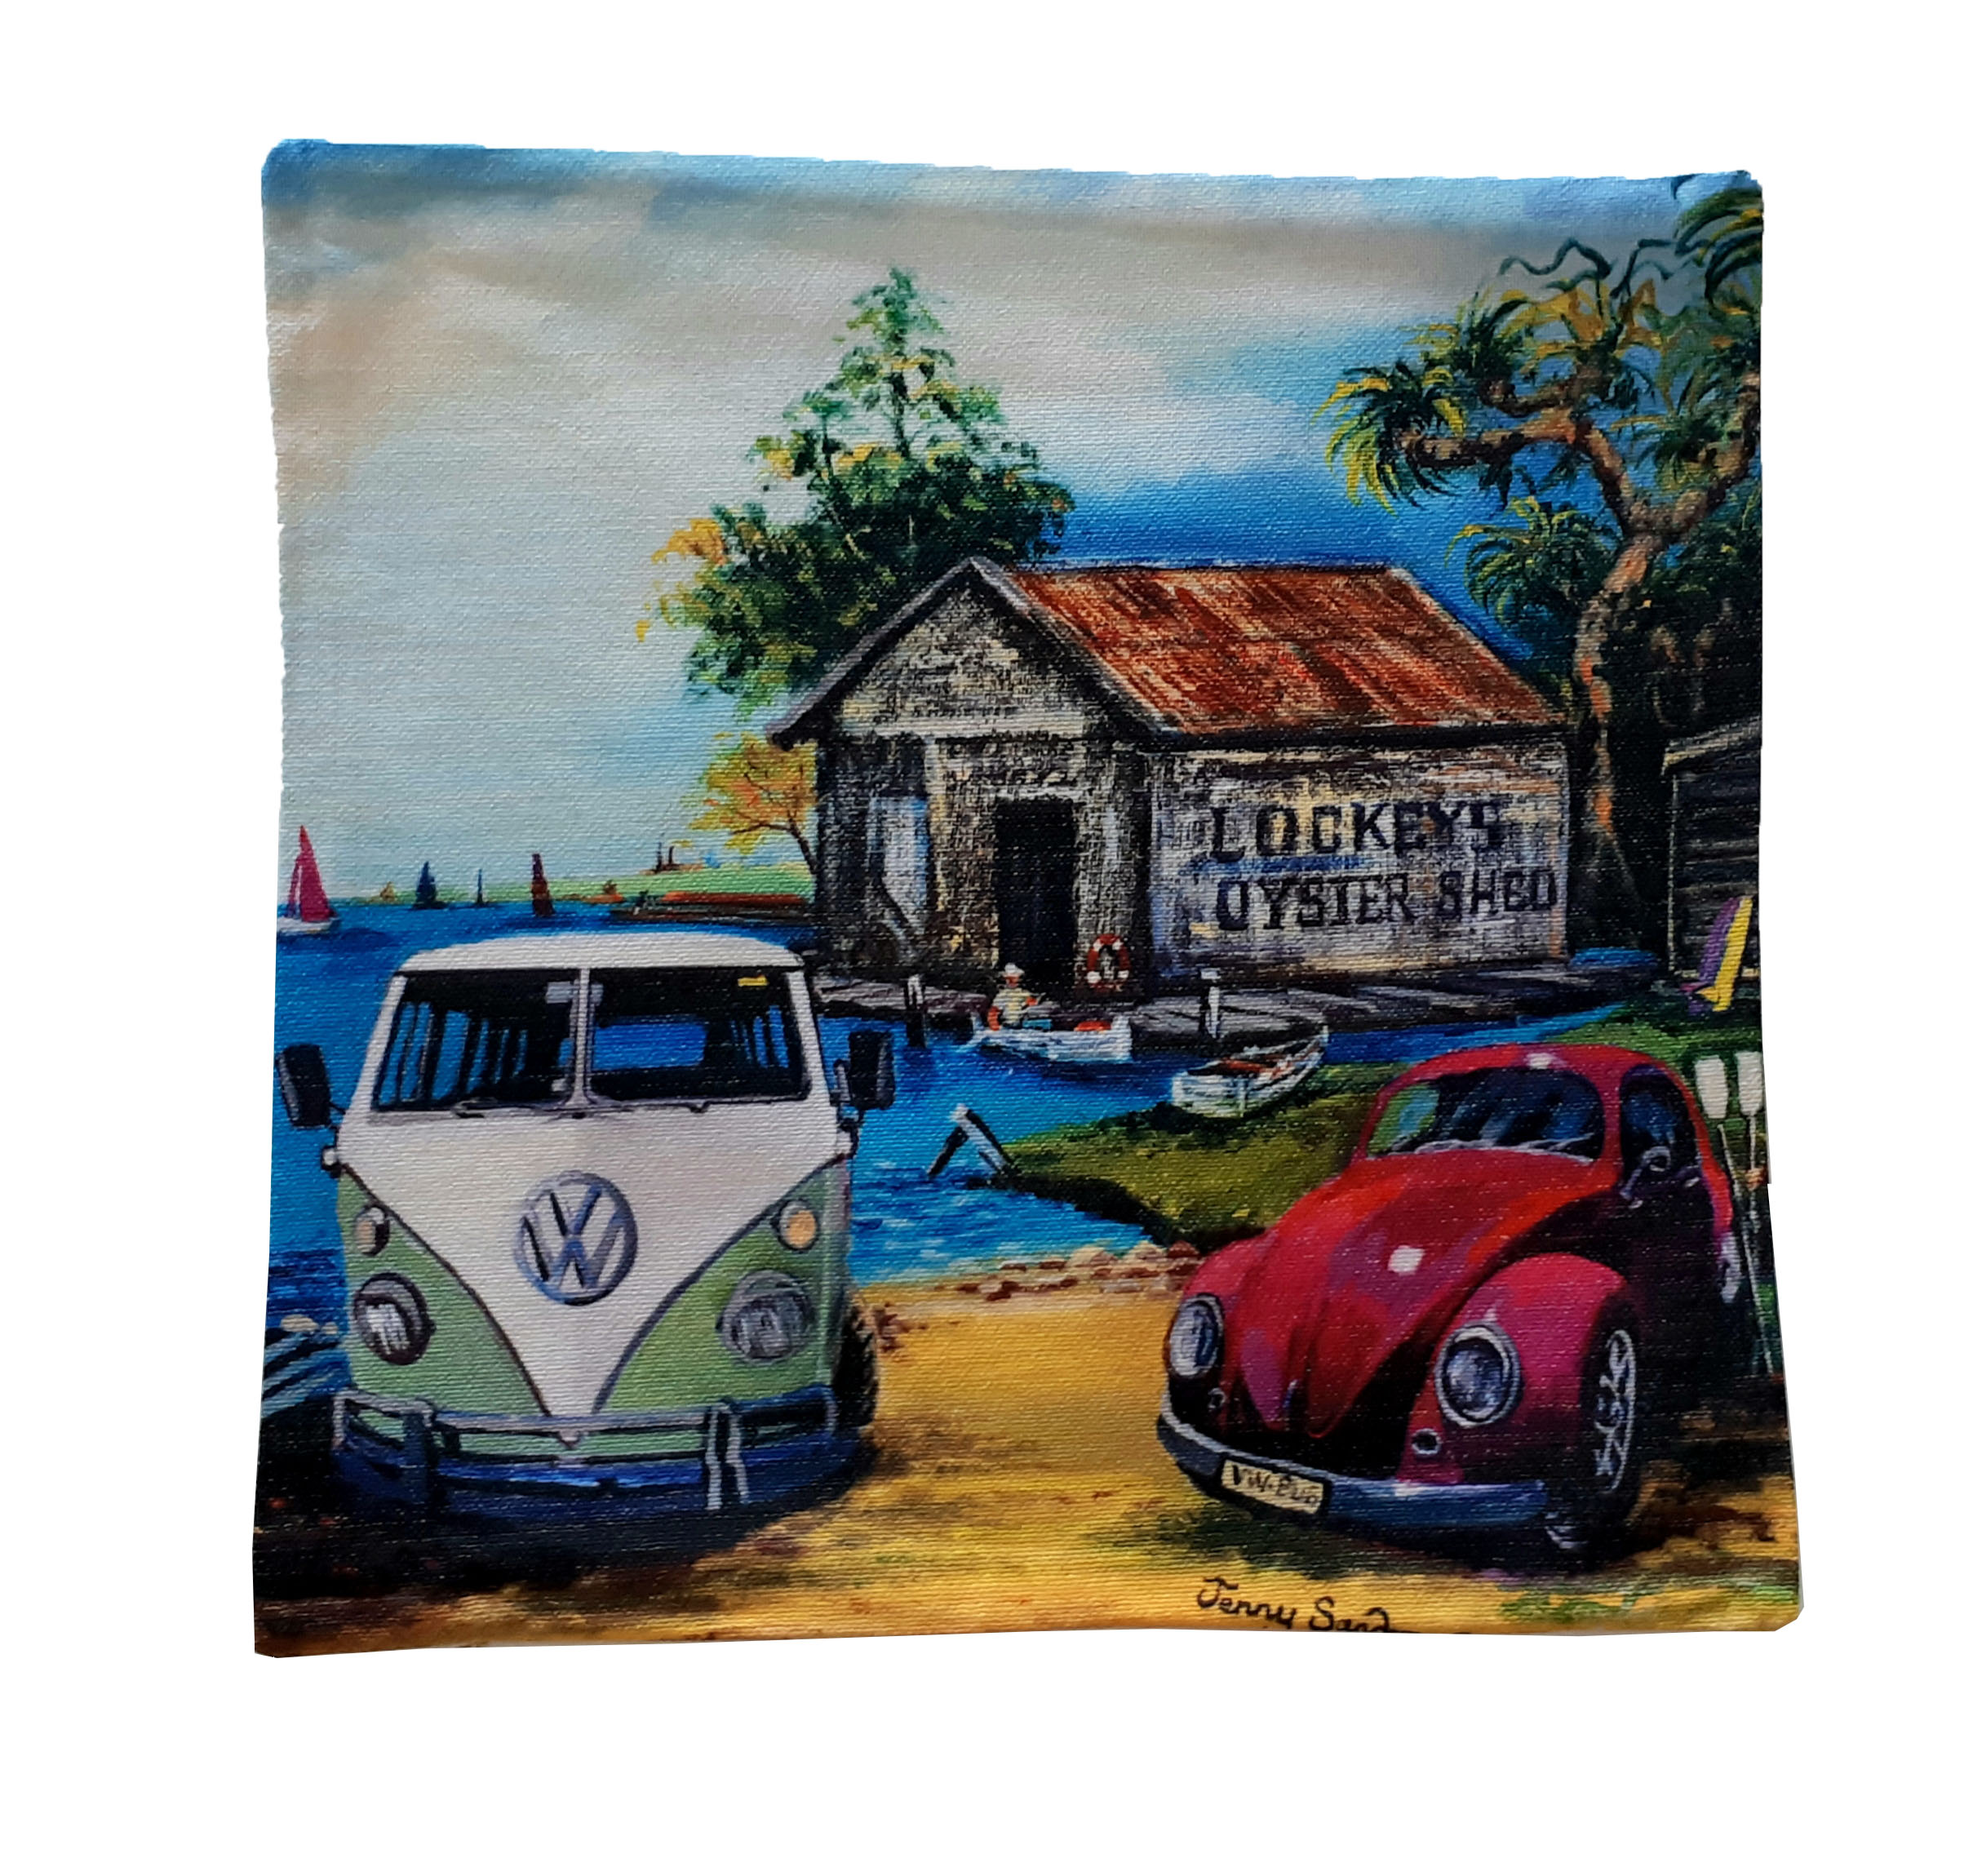 Lockeys Oyster Shed – Cushion Cover